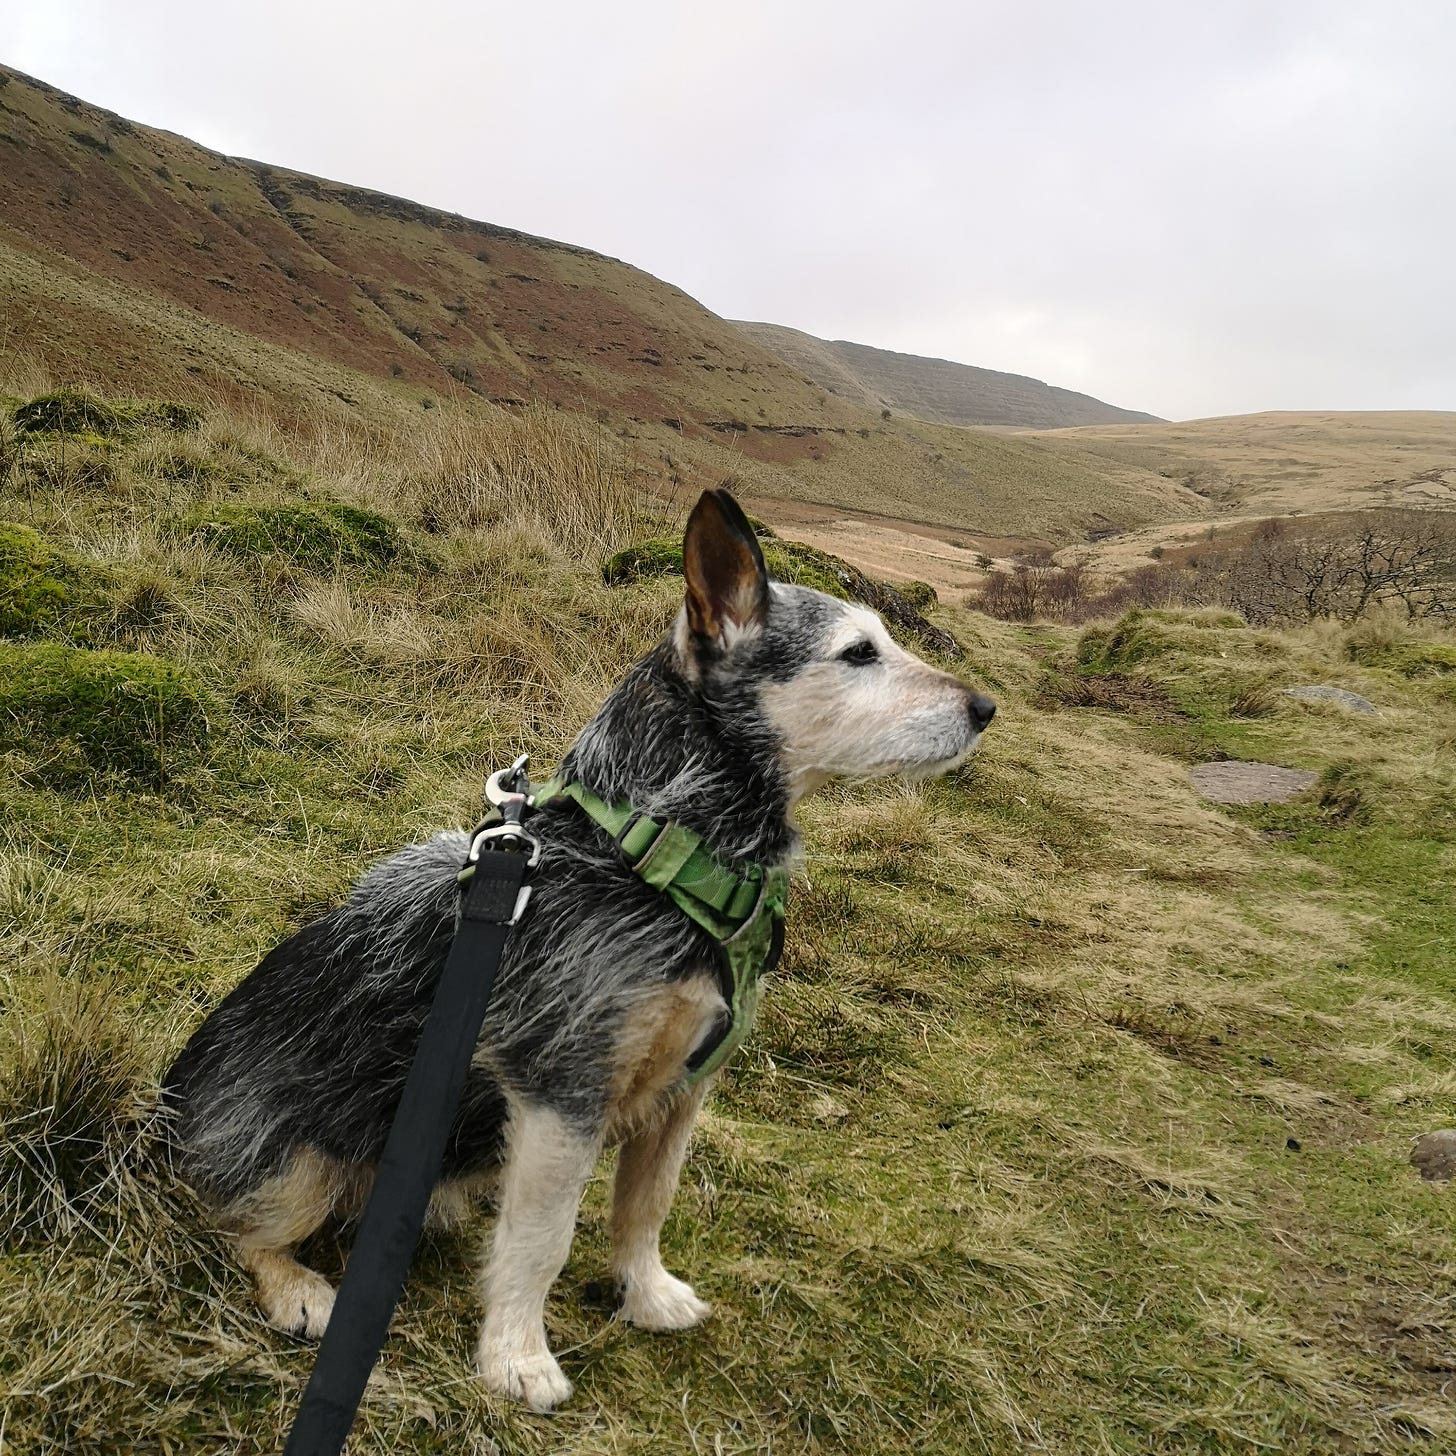 Jack the cruffy black and tan terrier sits on the mountainsidegazing off mysteriously into the distance.